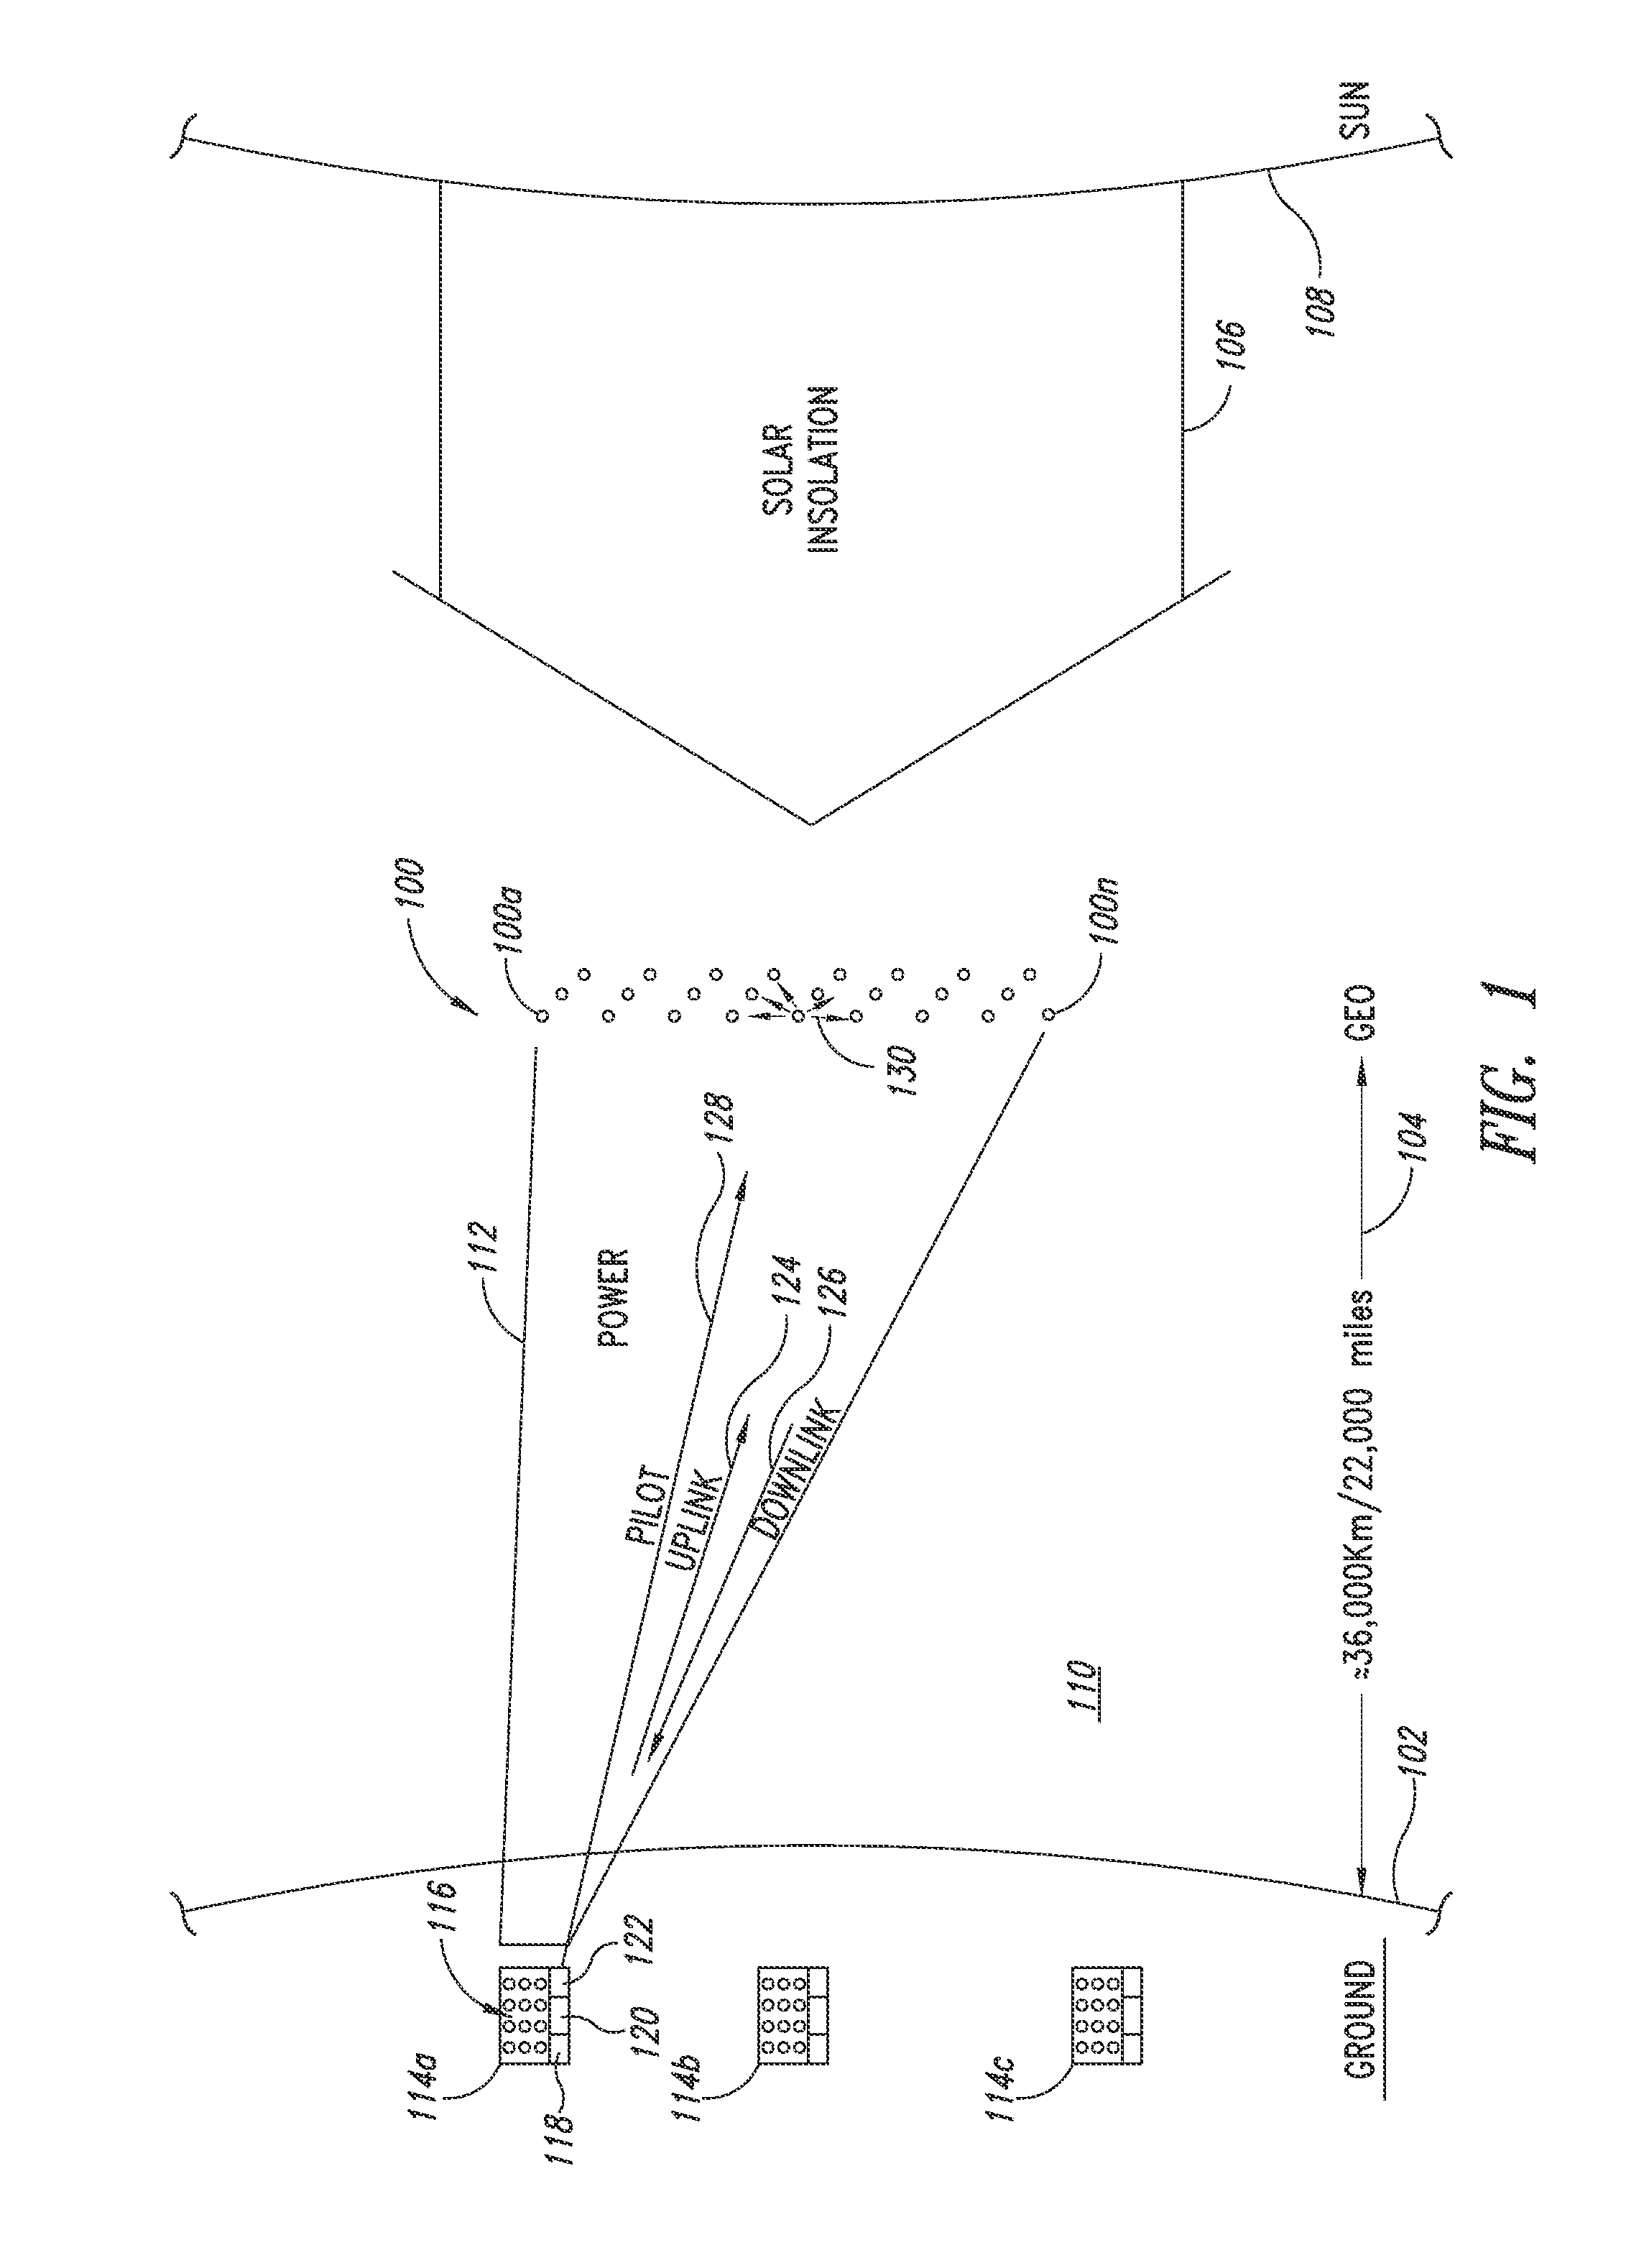 Space-Based Power Systems And Methods